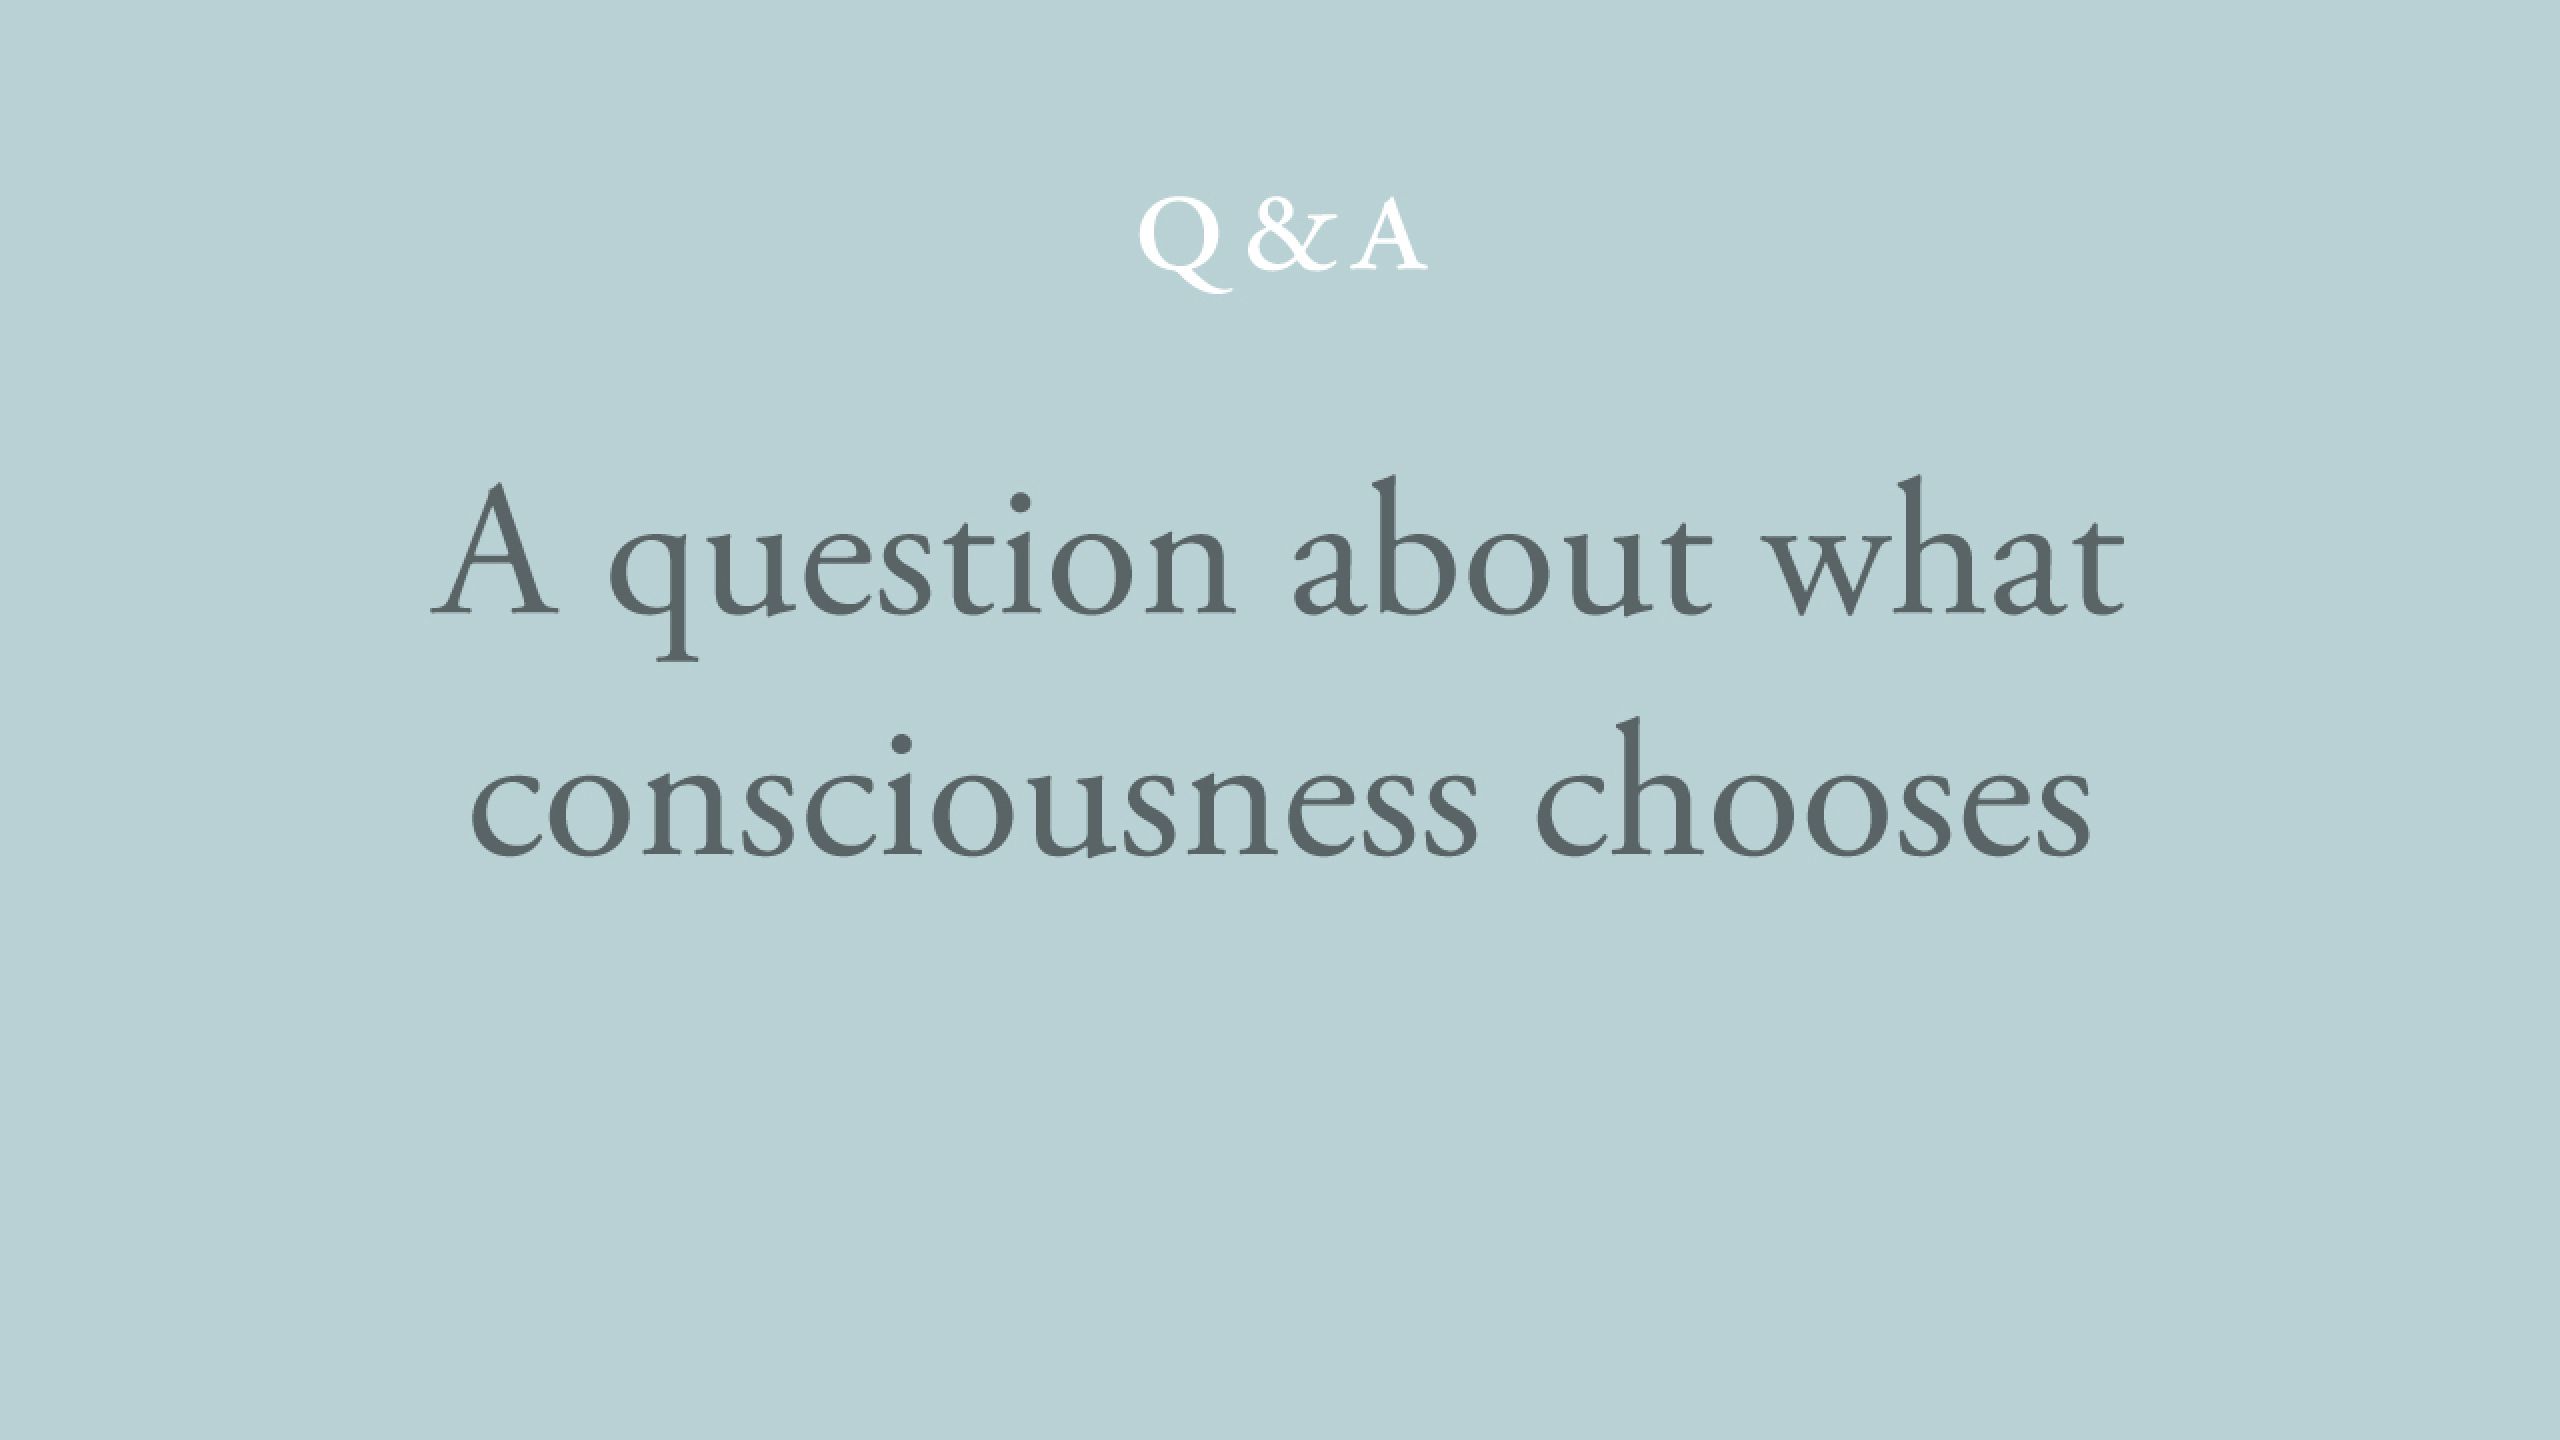 Does consciousness really choose anything?